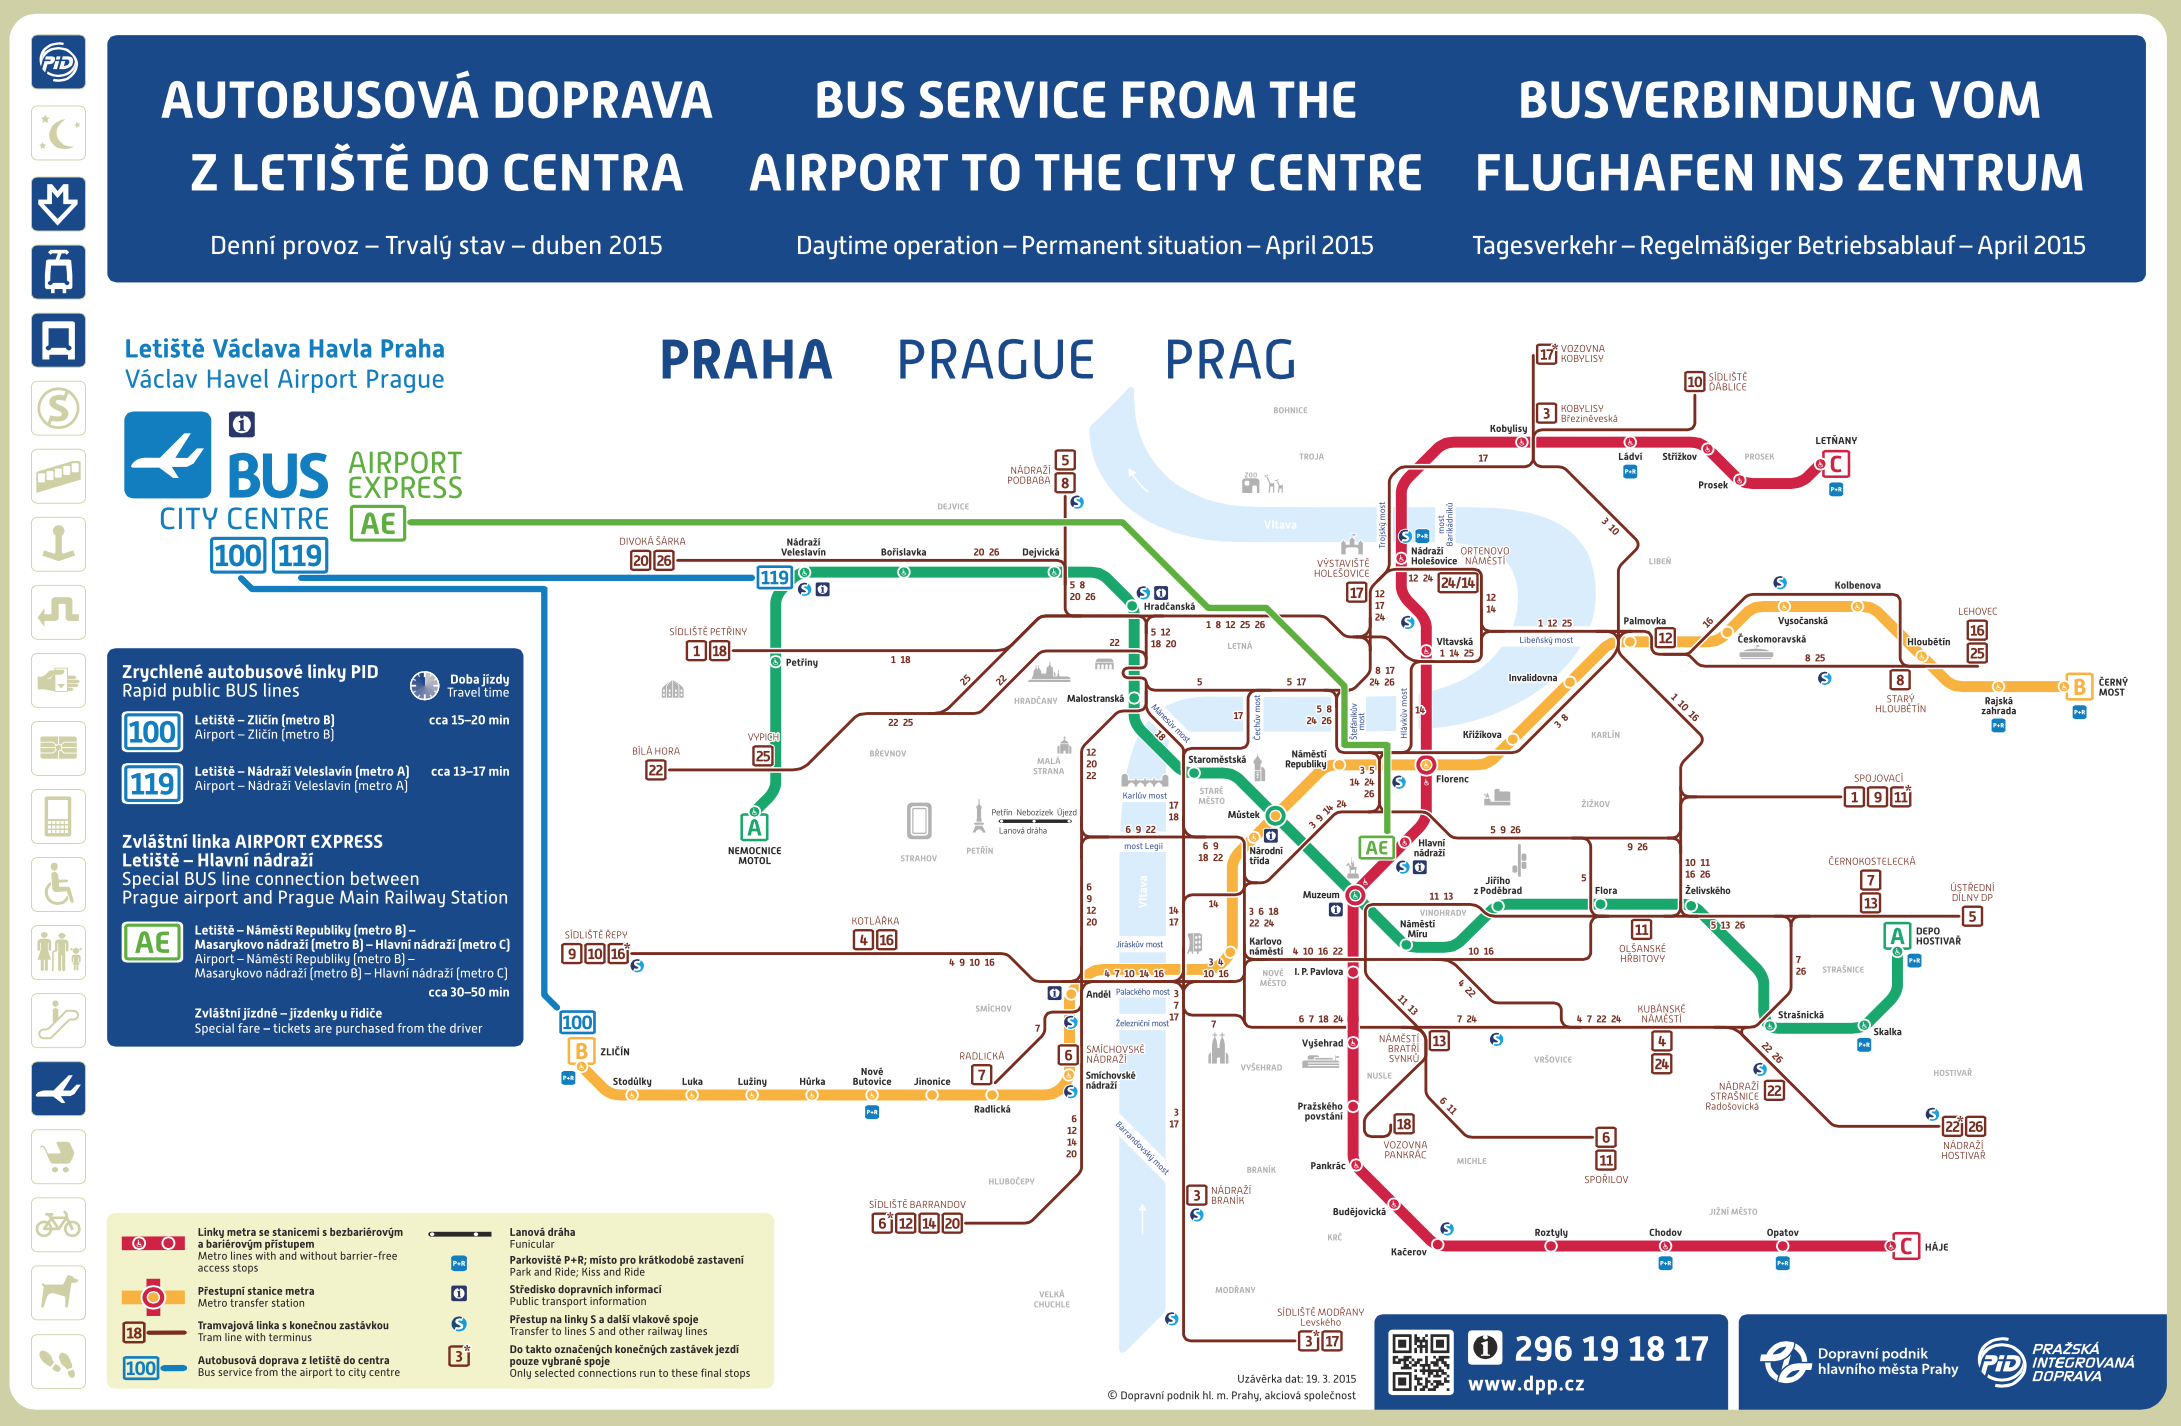 Map of bus service to the airport